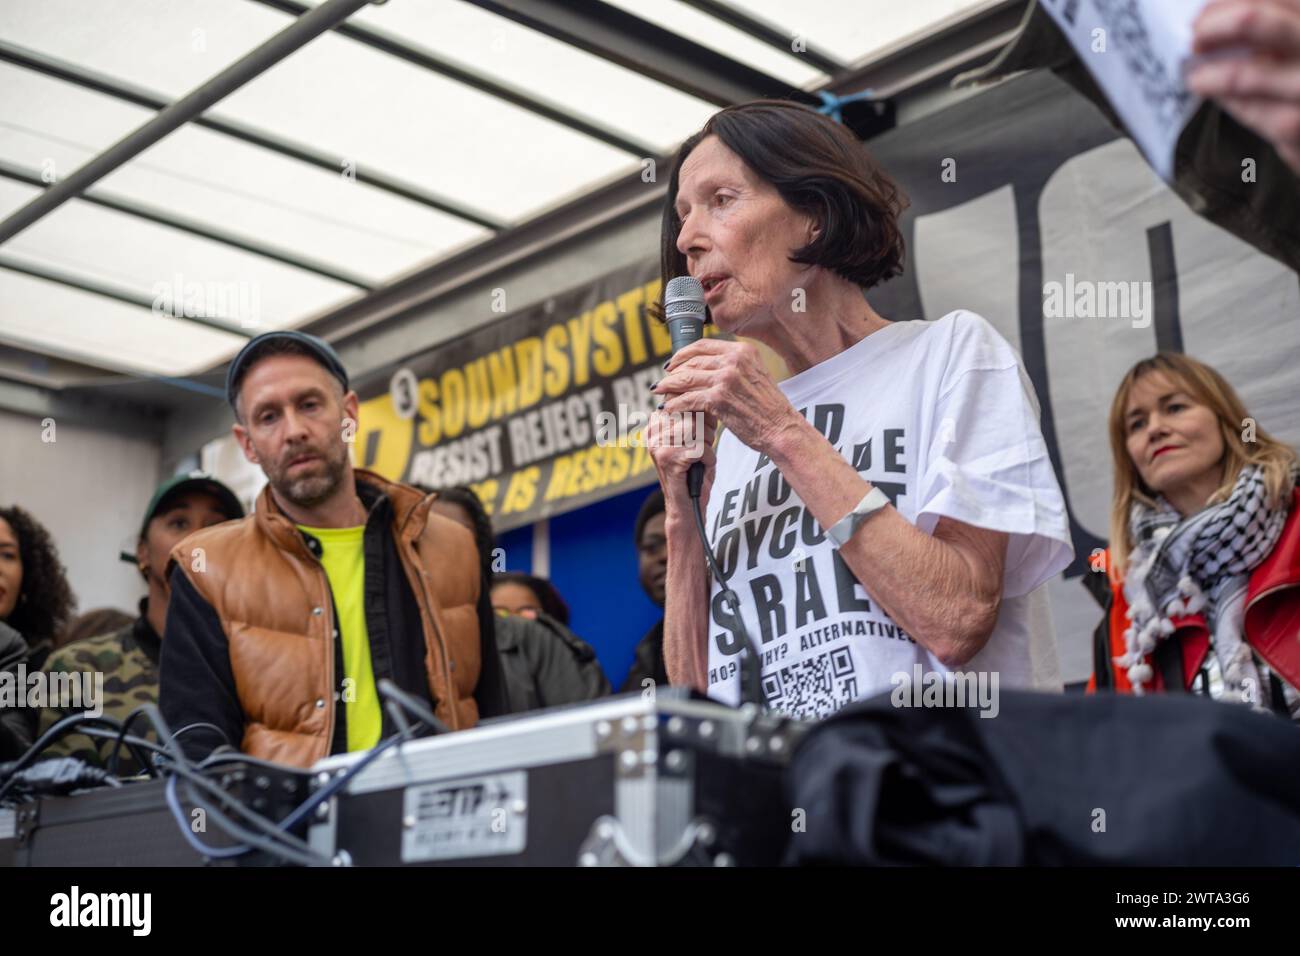 London / UK. 16 March 2024. Katharine Hamnett address hundreds of people gathered outside Downing Street to demonstrate against the growing racism in the UK. Alamy Live News / Aubrey Fagon. Stock Photo